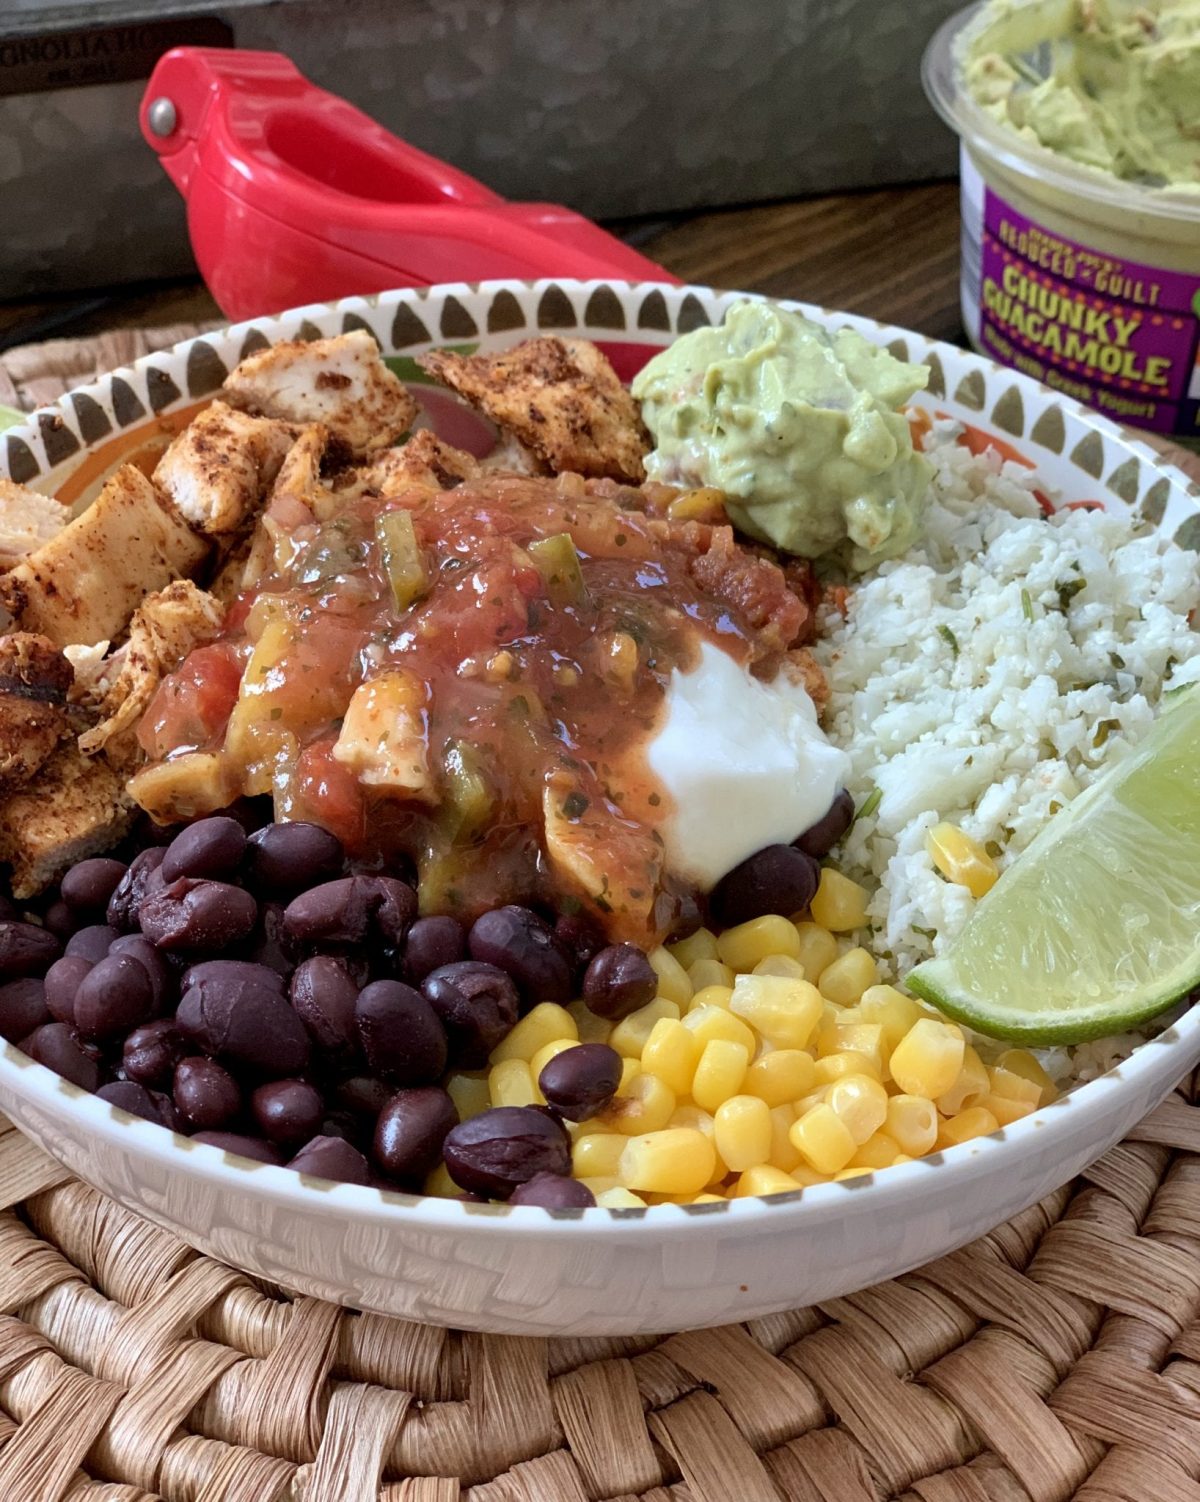 Weekday Meal-Prep Chicken Burrito Bowls Recipe by Tasty